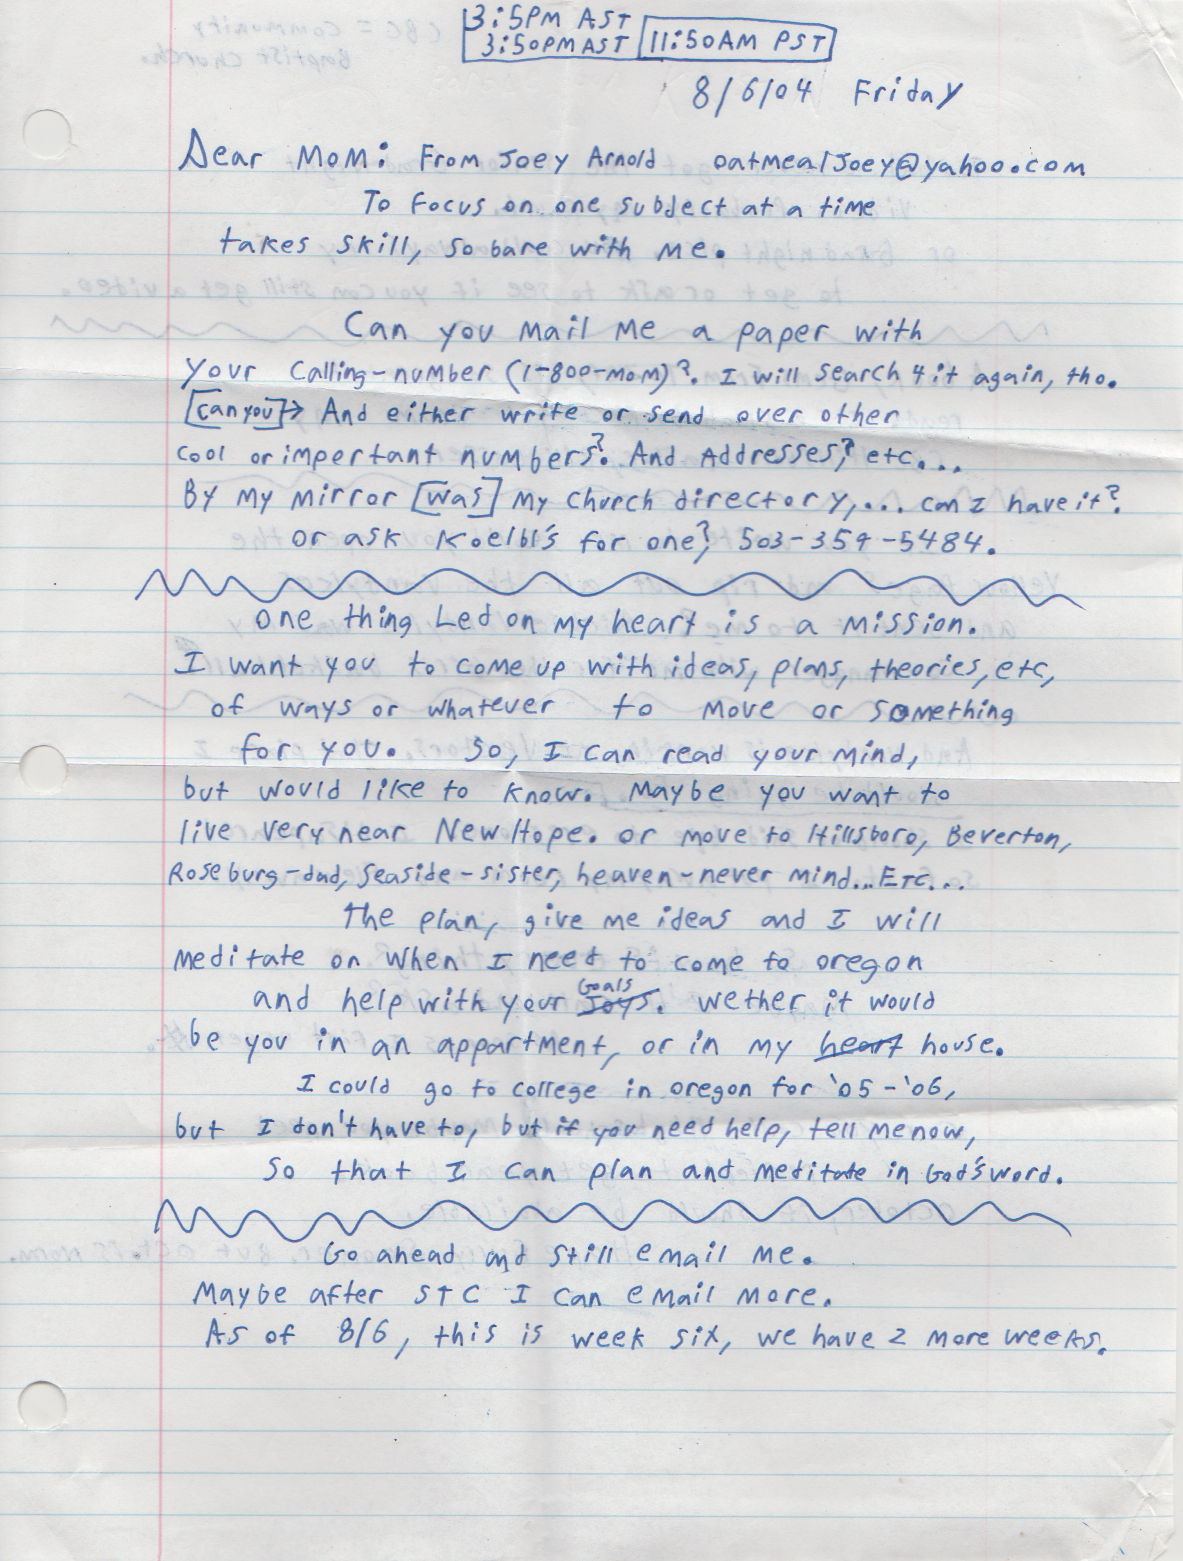 2004-08-06 - Friday - 03:50 PM ET - Joey Arnold Letter to Marilyn Mitchell mentioning her and moving which she did 3 years after that-1.png